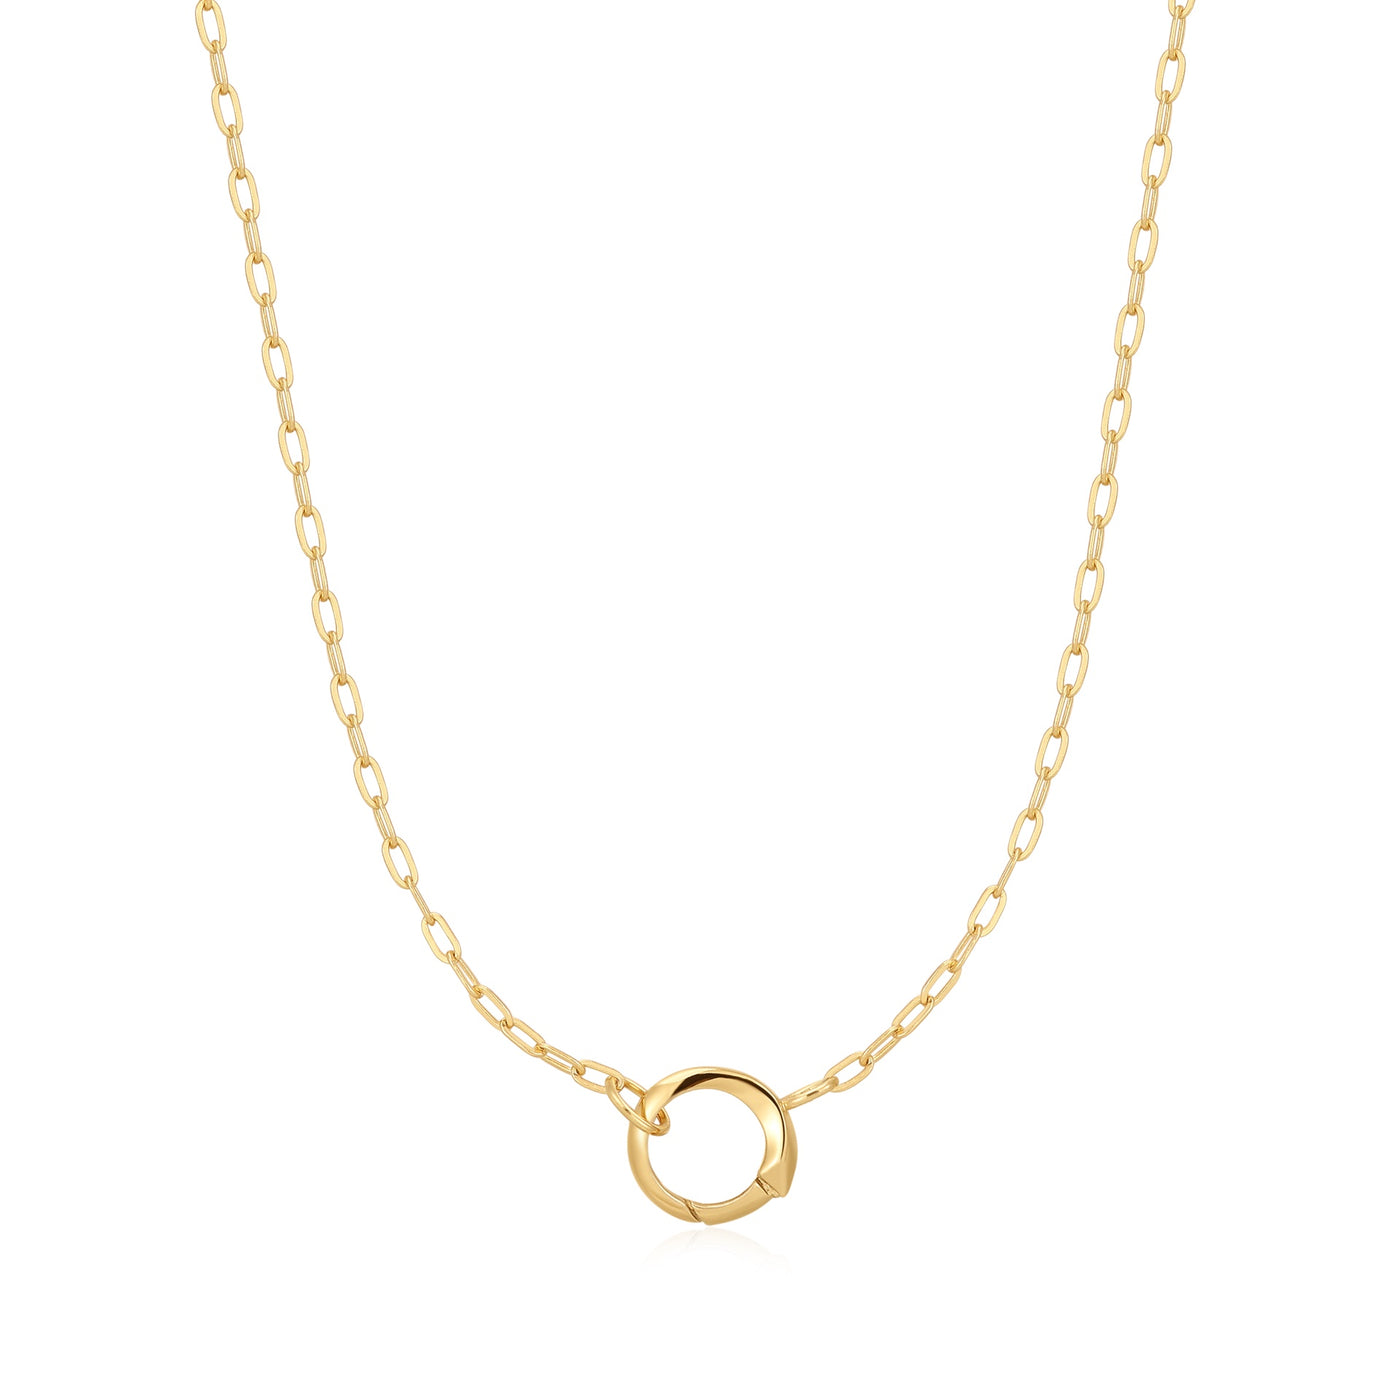 Pop Charms - Gold Mini Link Charm Chain Connector Necklace